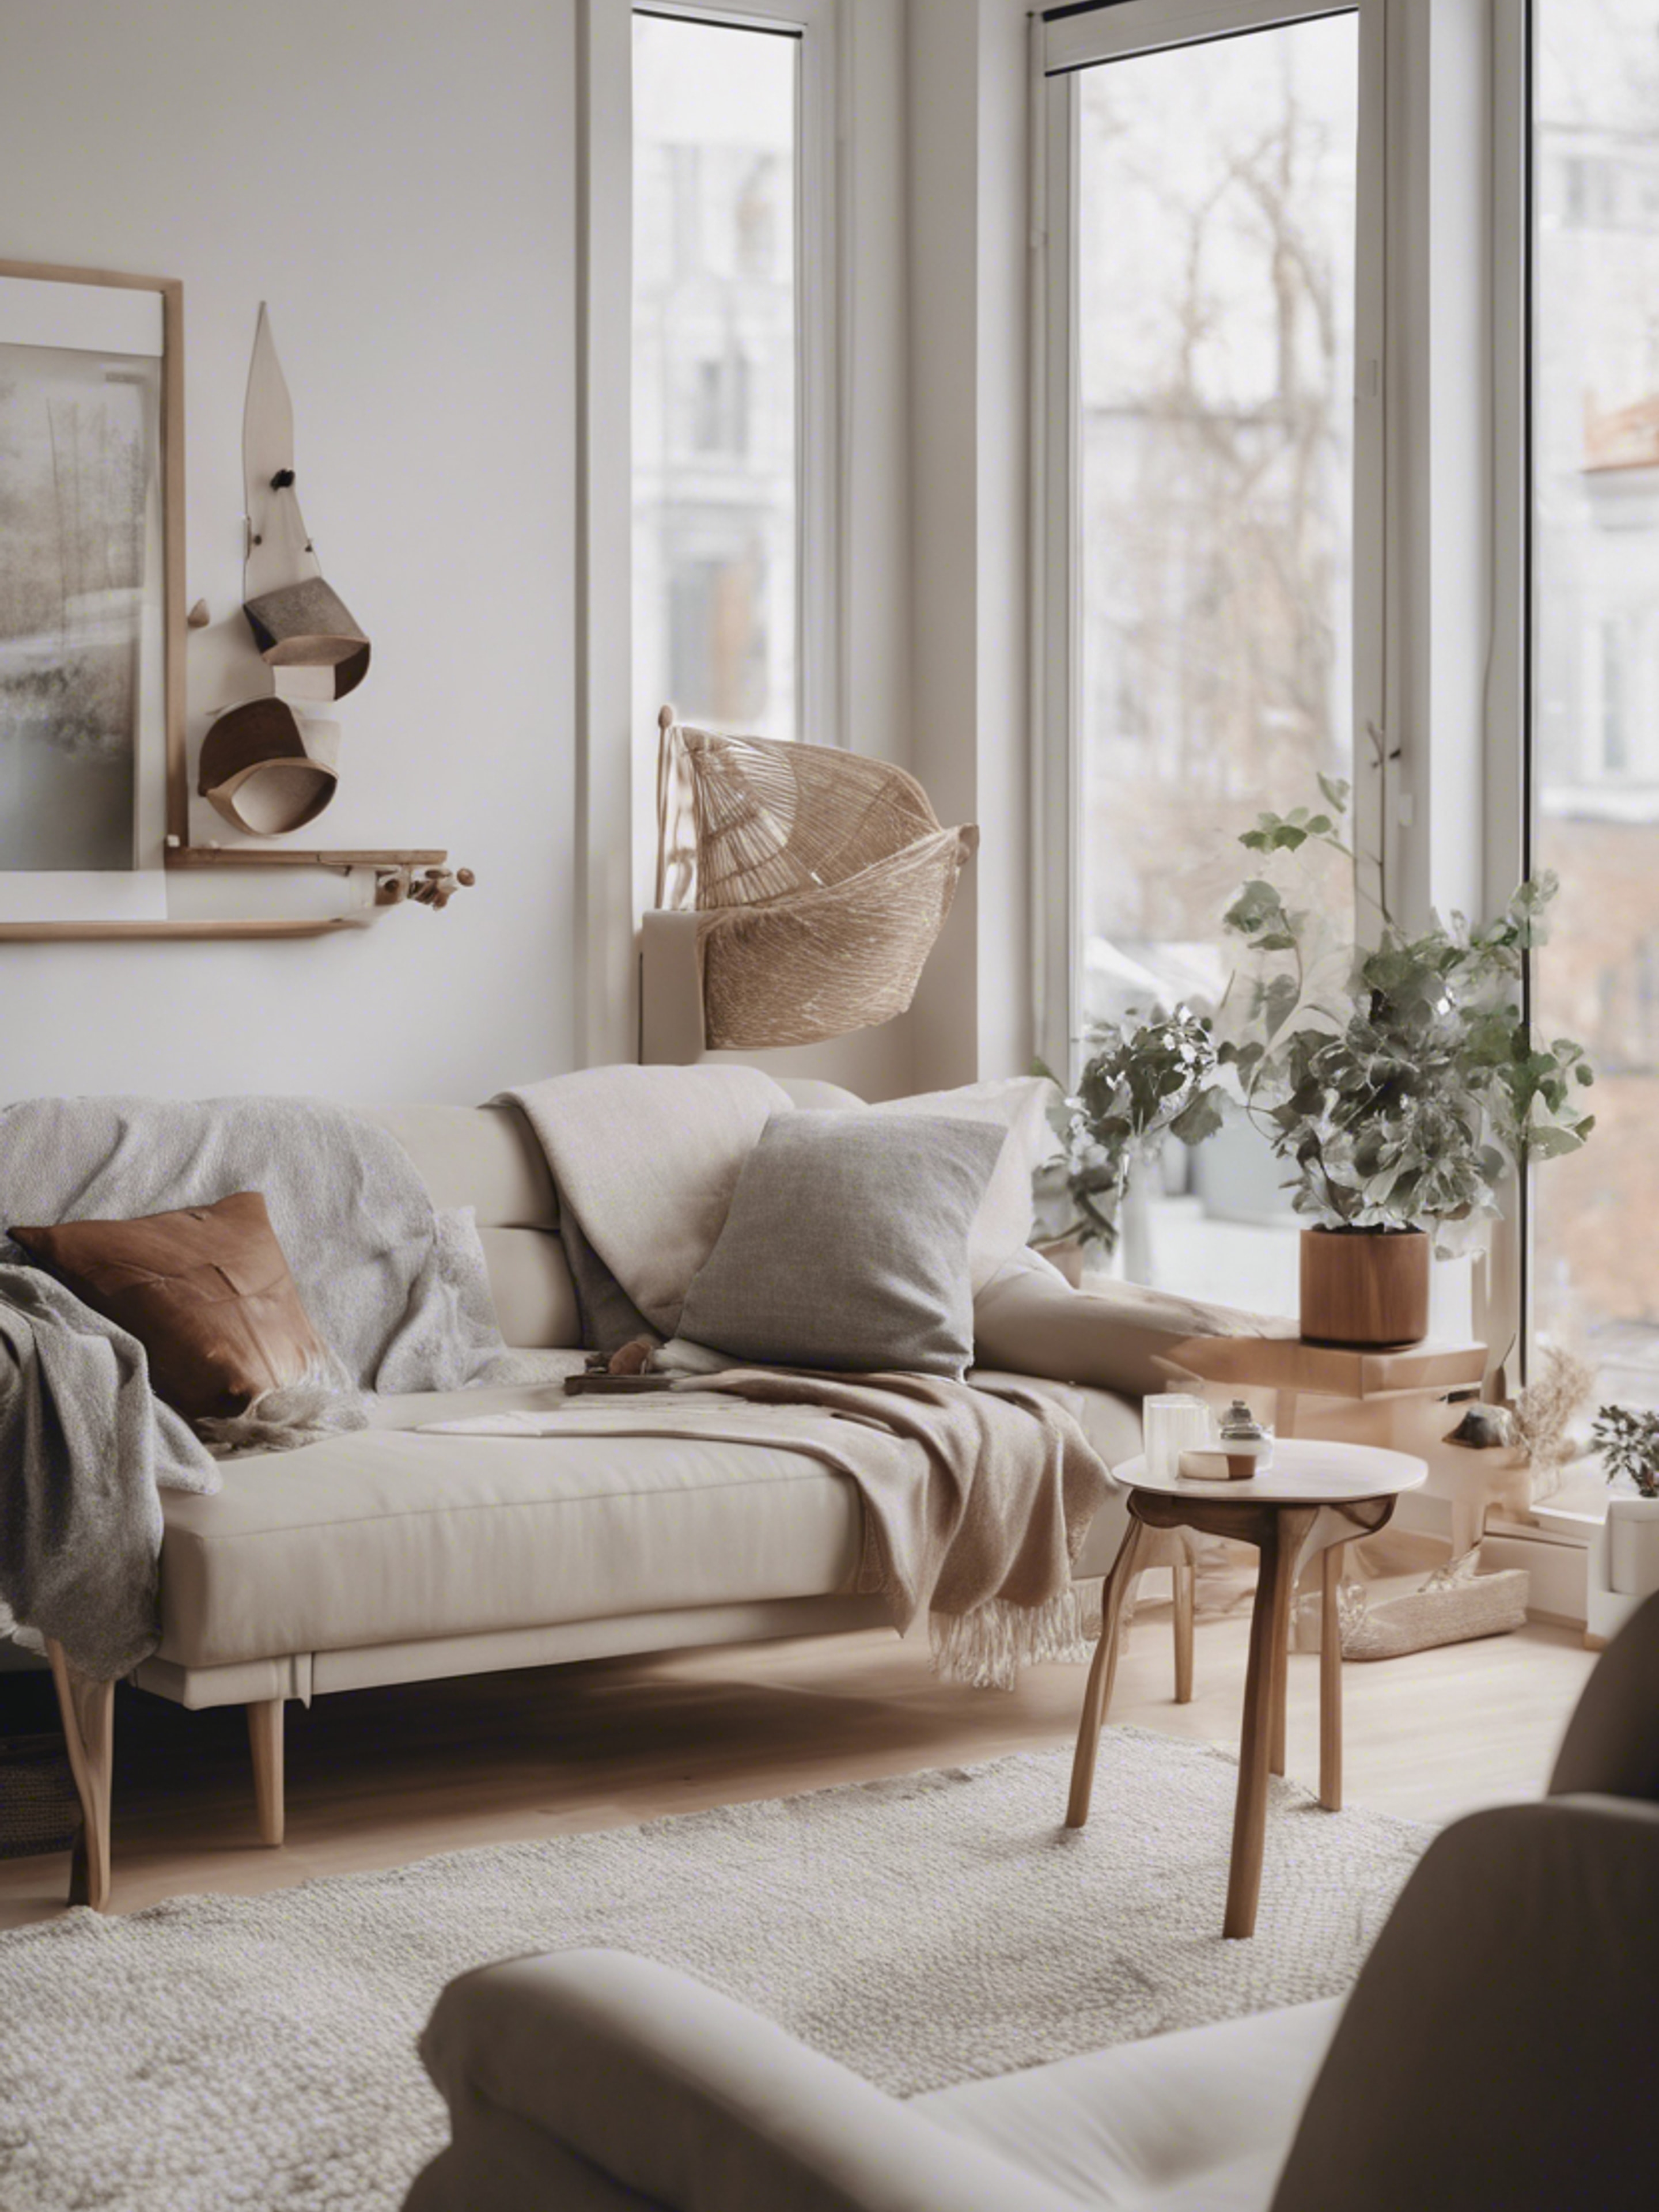 A Nordic-styled apartment with minimalist design, neutral color palette, and cozy accents. Обои[7cbaae500de44ae0bb2d]